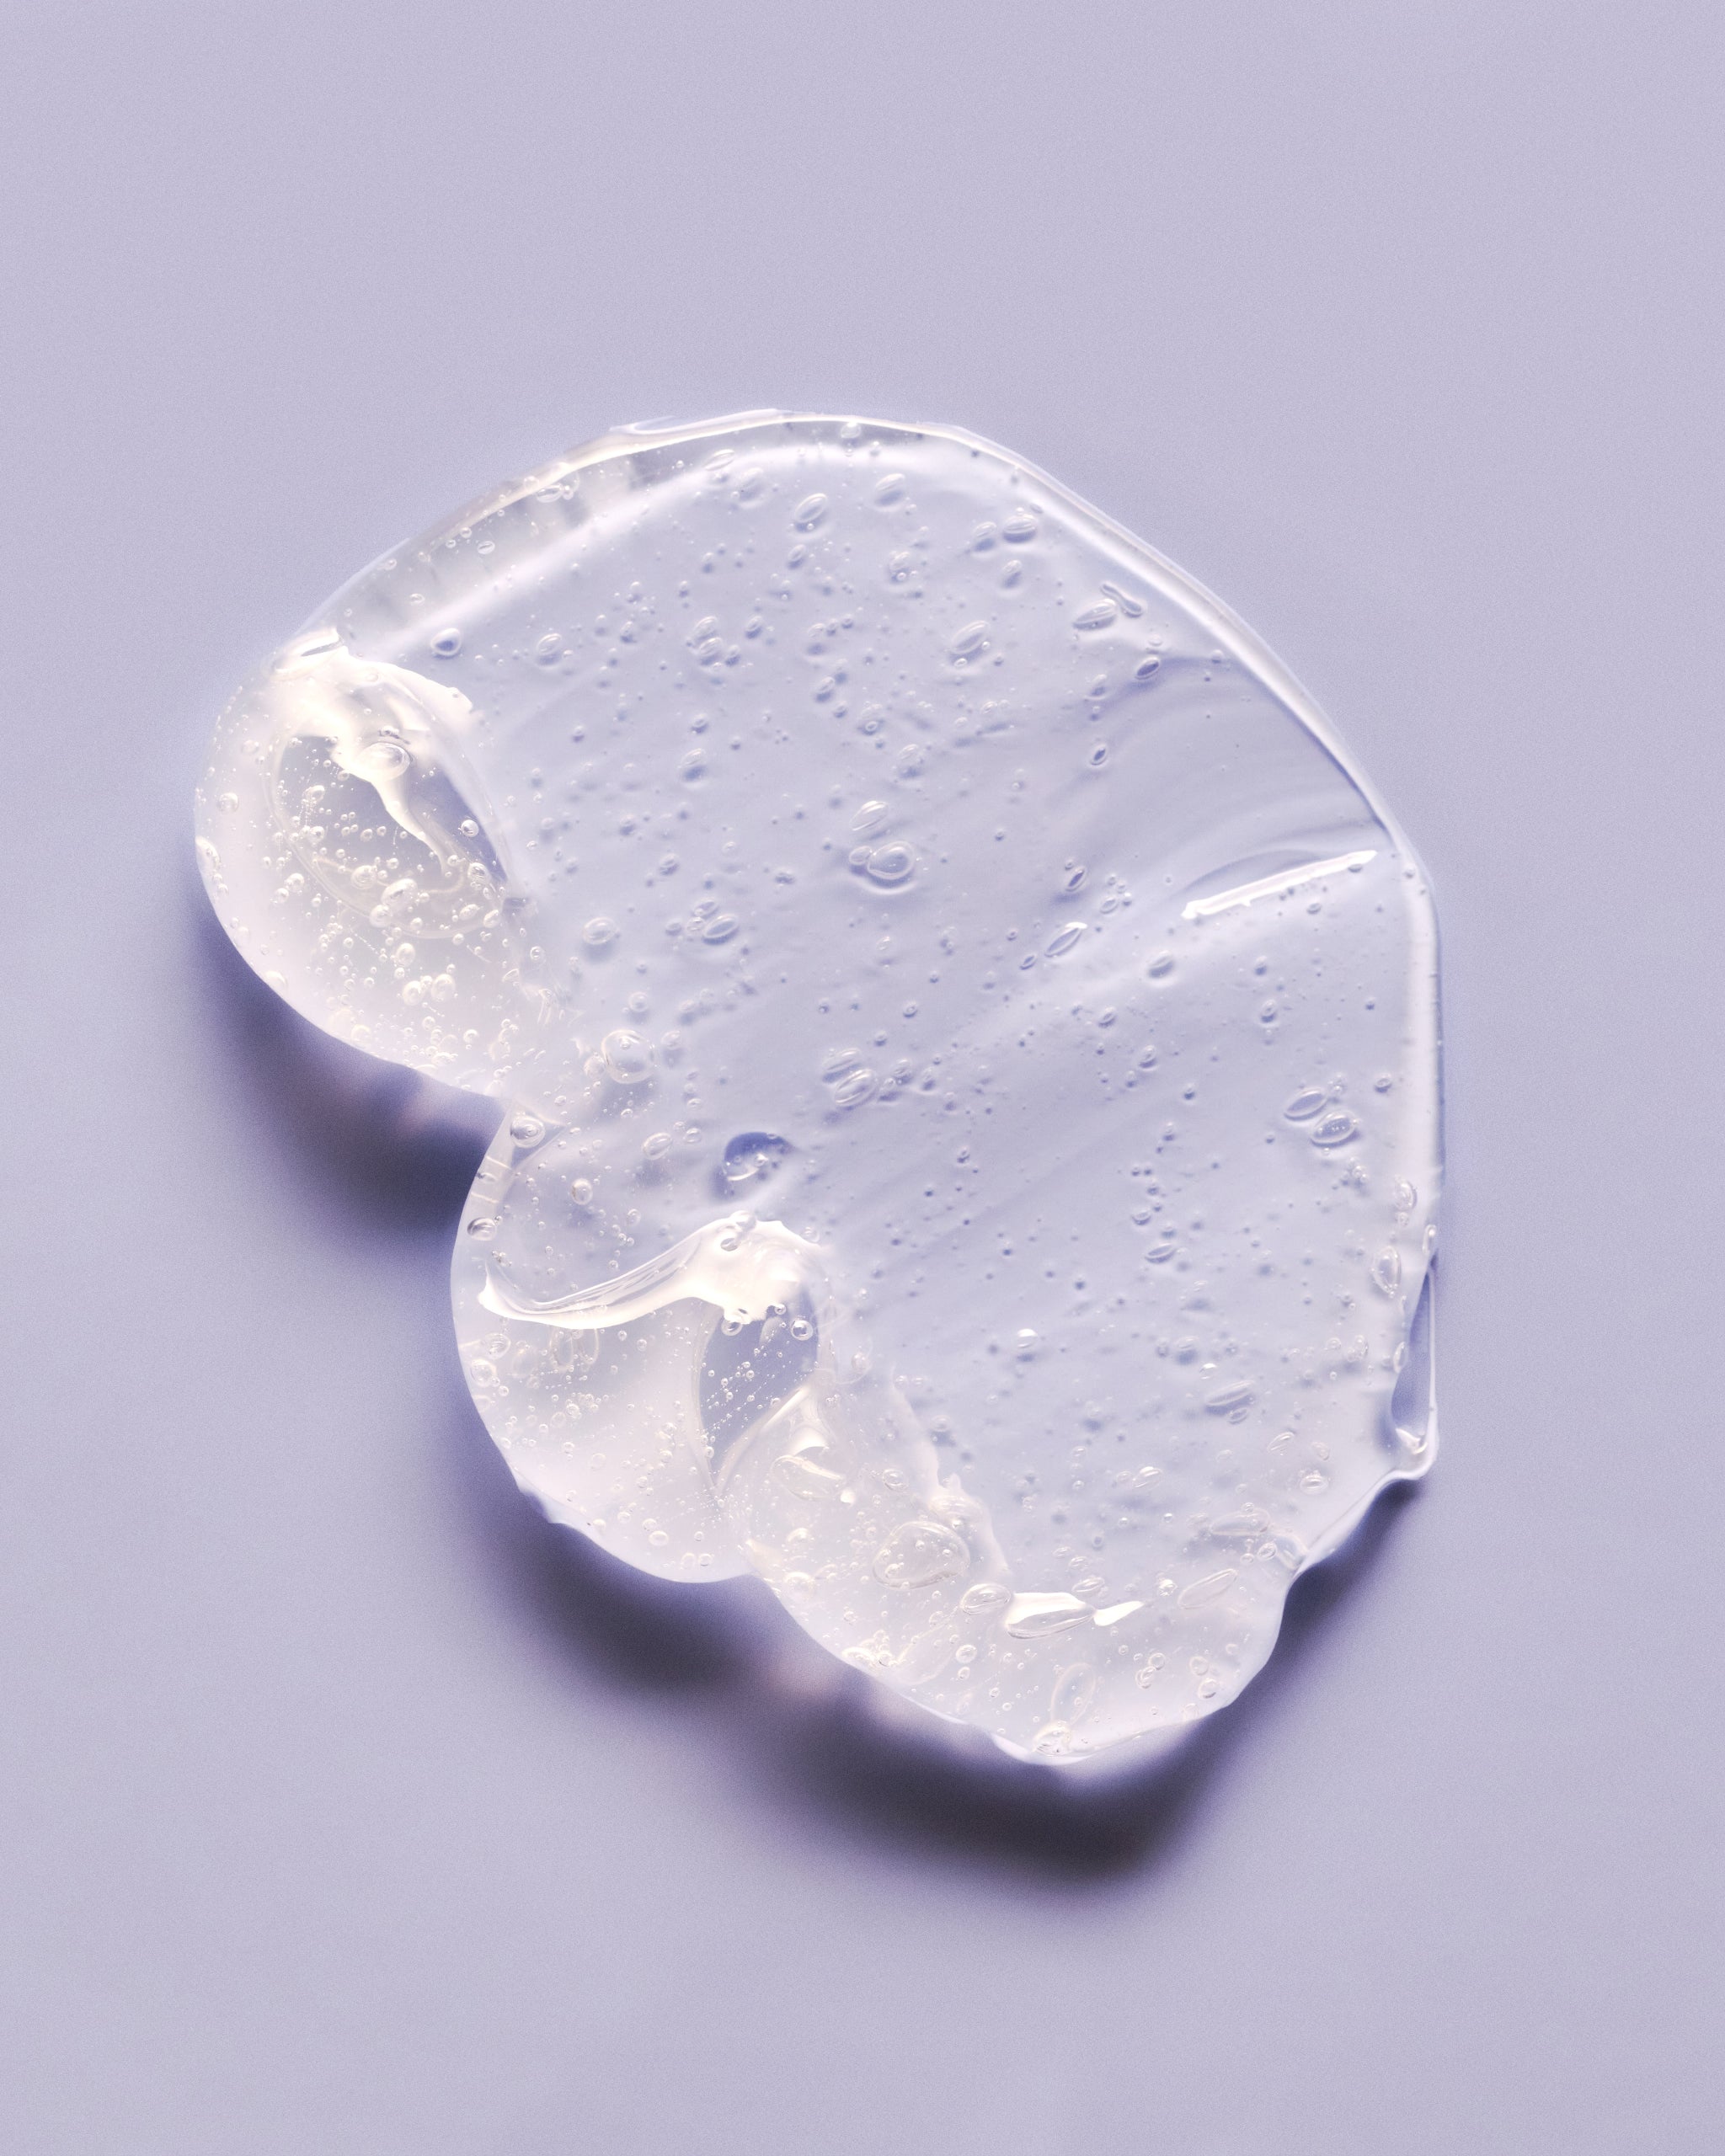 Dollop of Jelly Cleanser on pale purple background